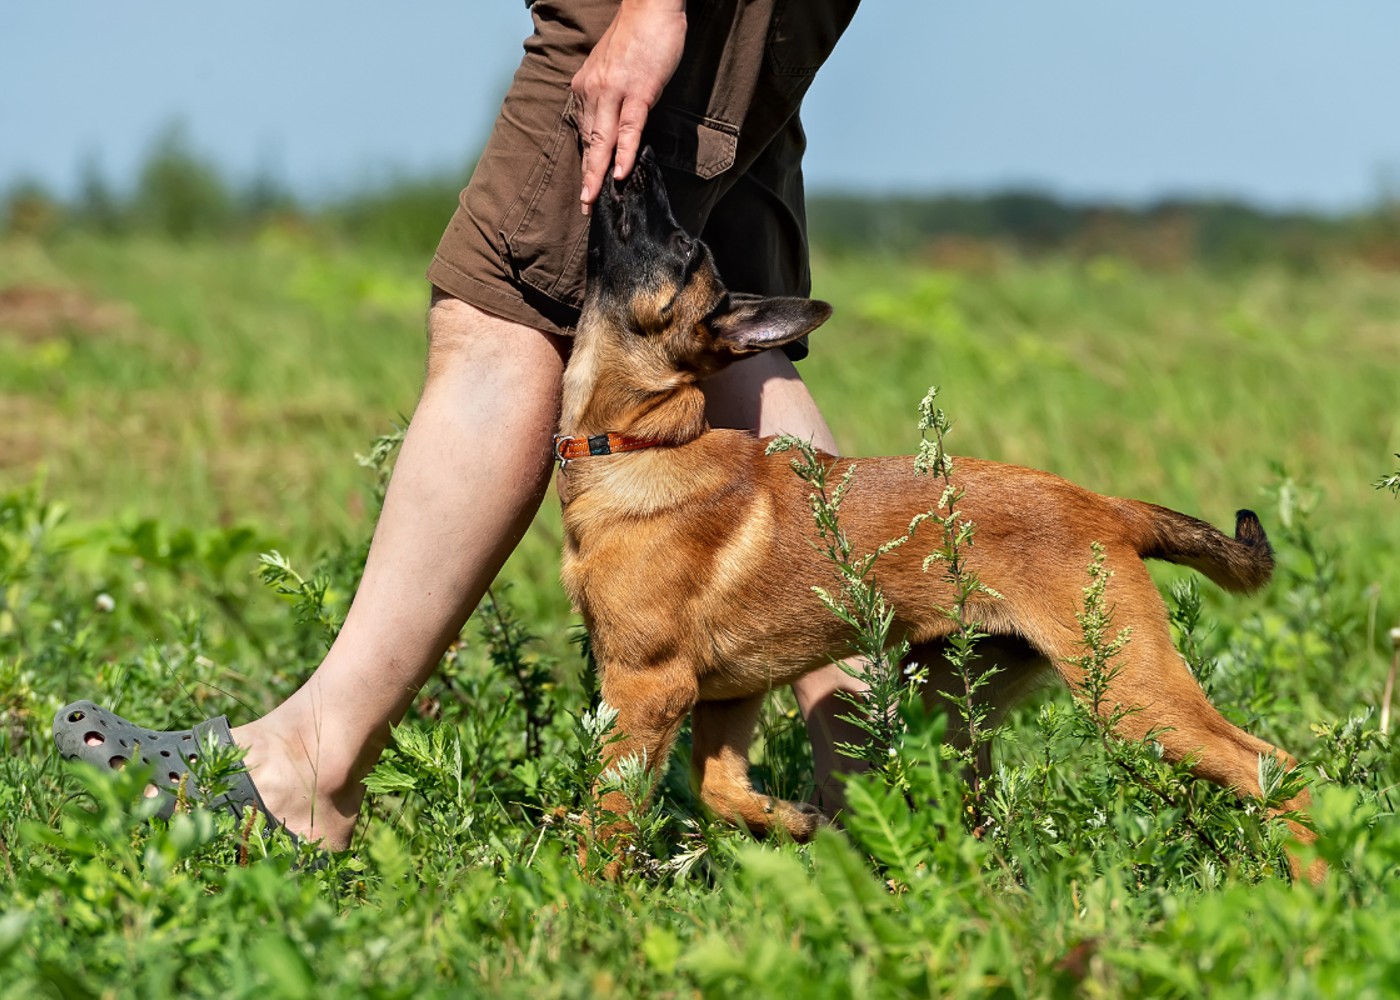 A dog and their owner together in a field - connect with your animal companion through dog training.